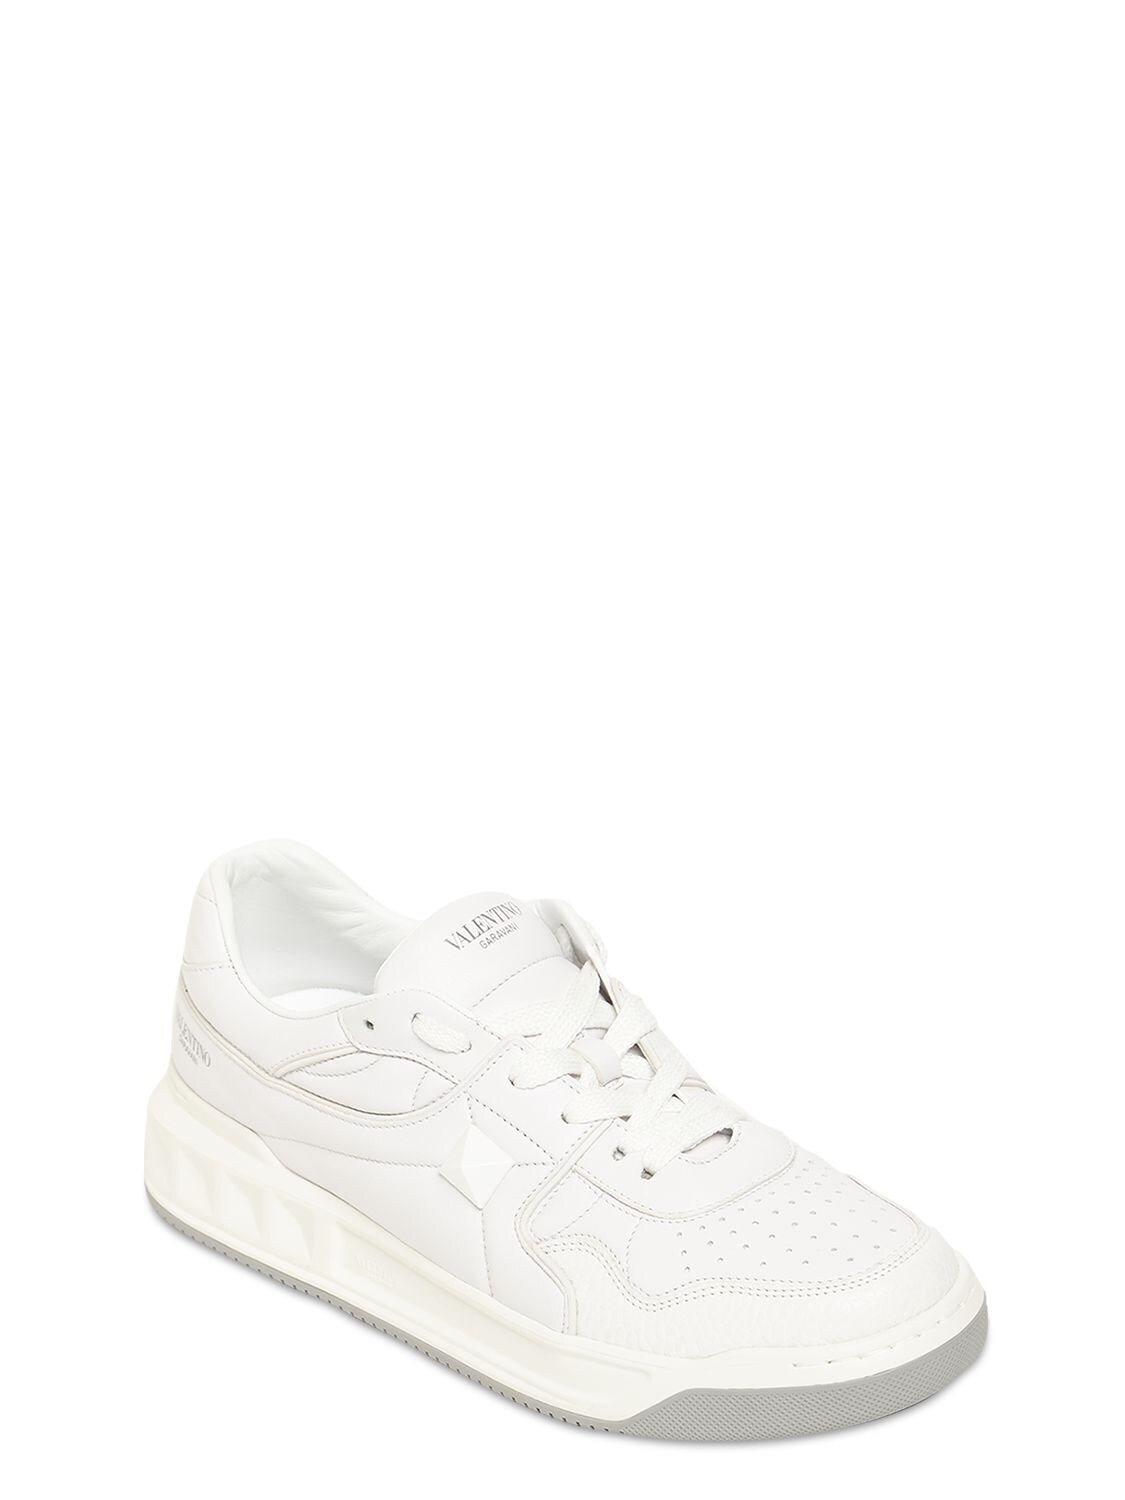 Shop Valentino Mid-top Leather Sneakers In White